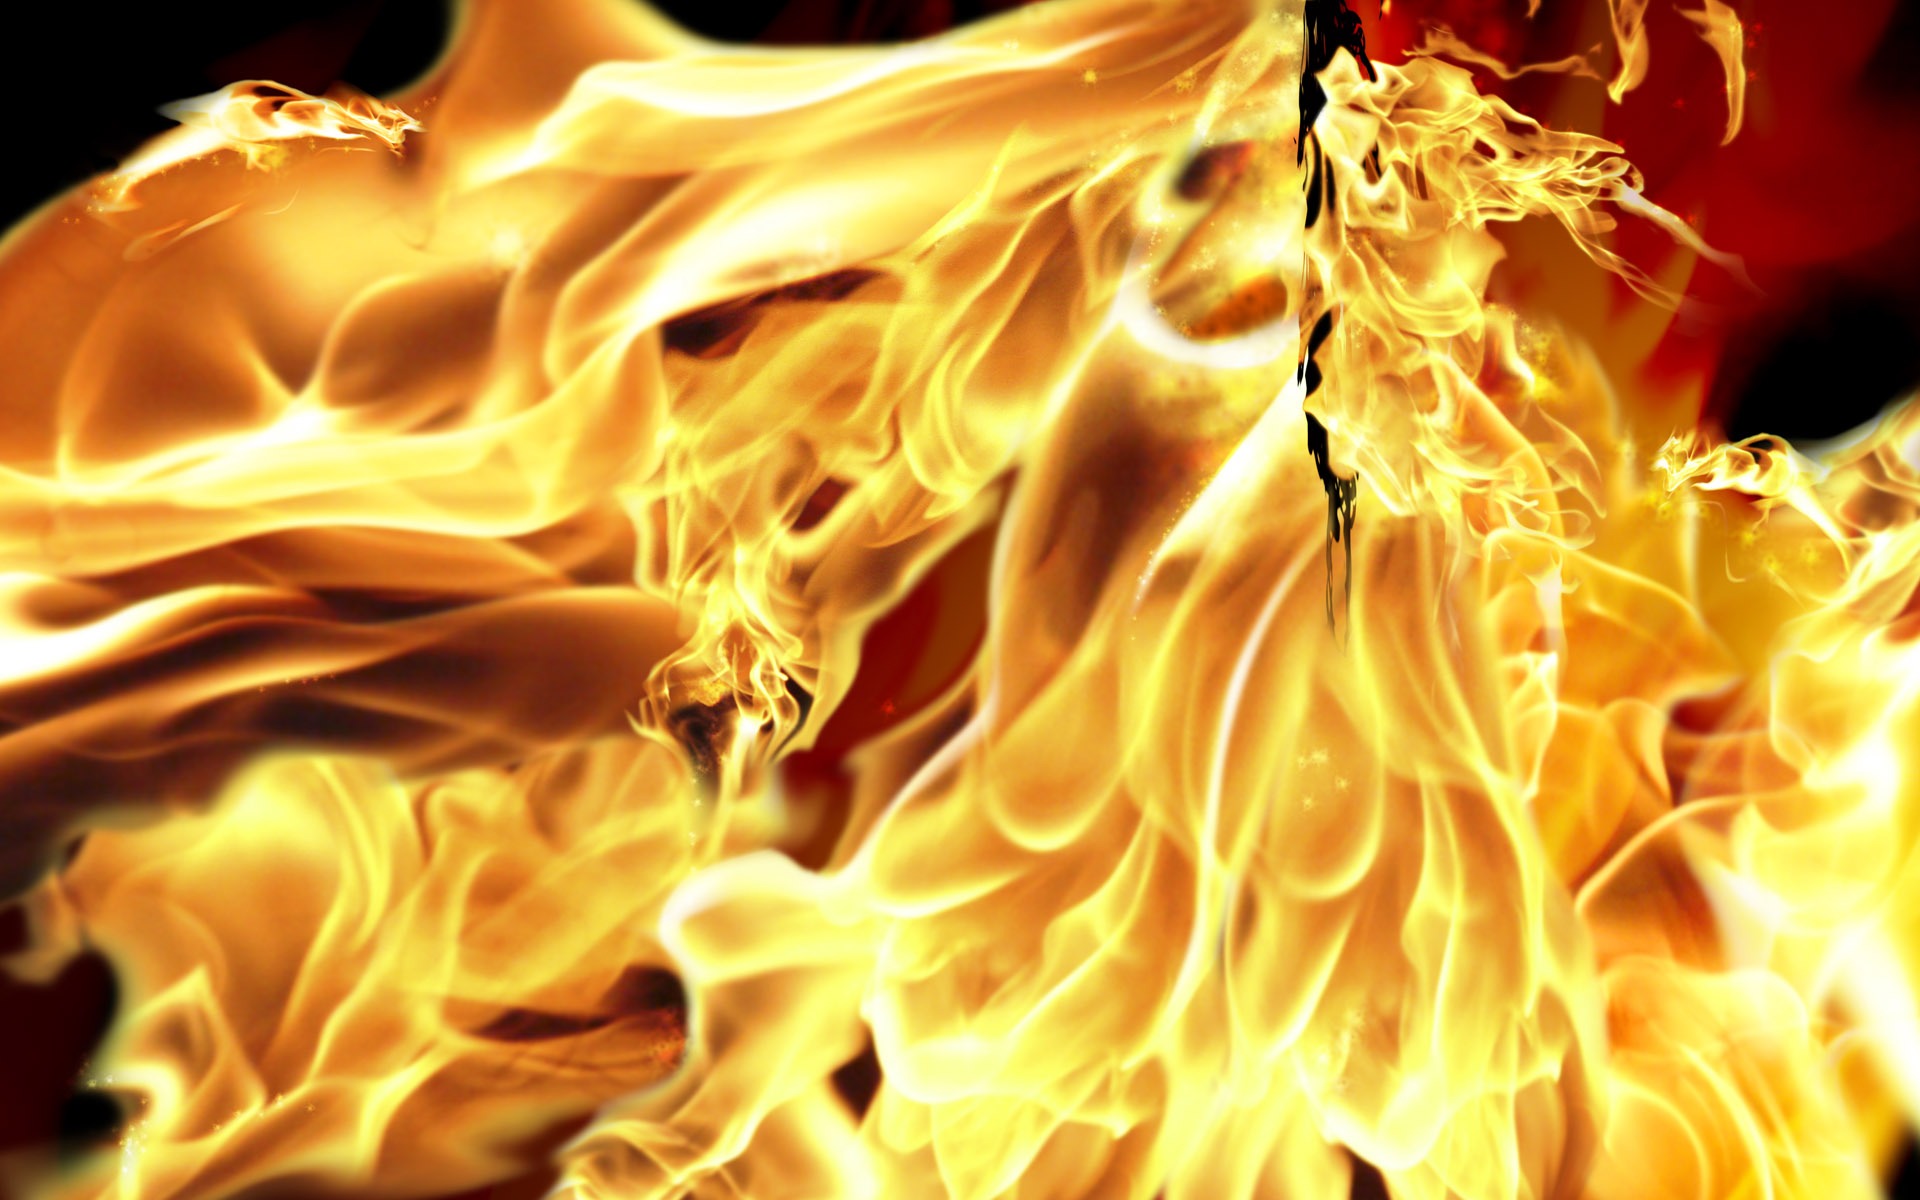 Flame Feature HD Wallpaper #2 - 1920x1200